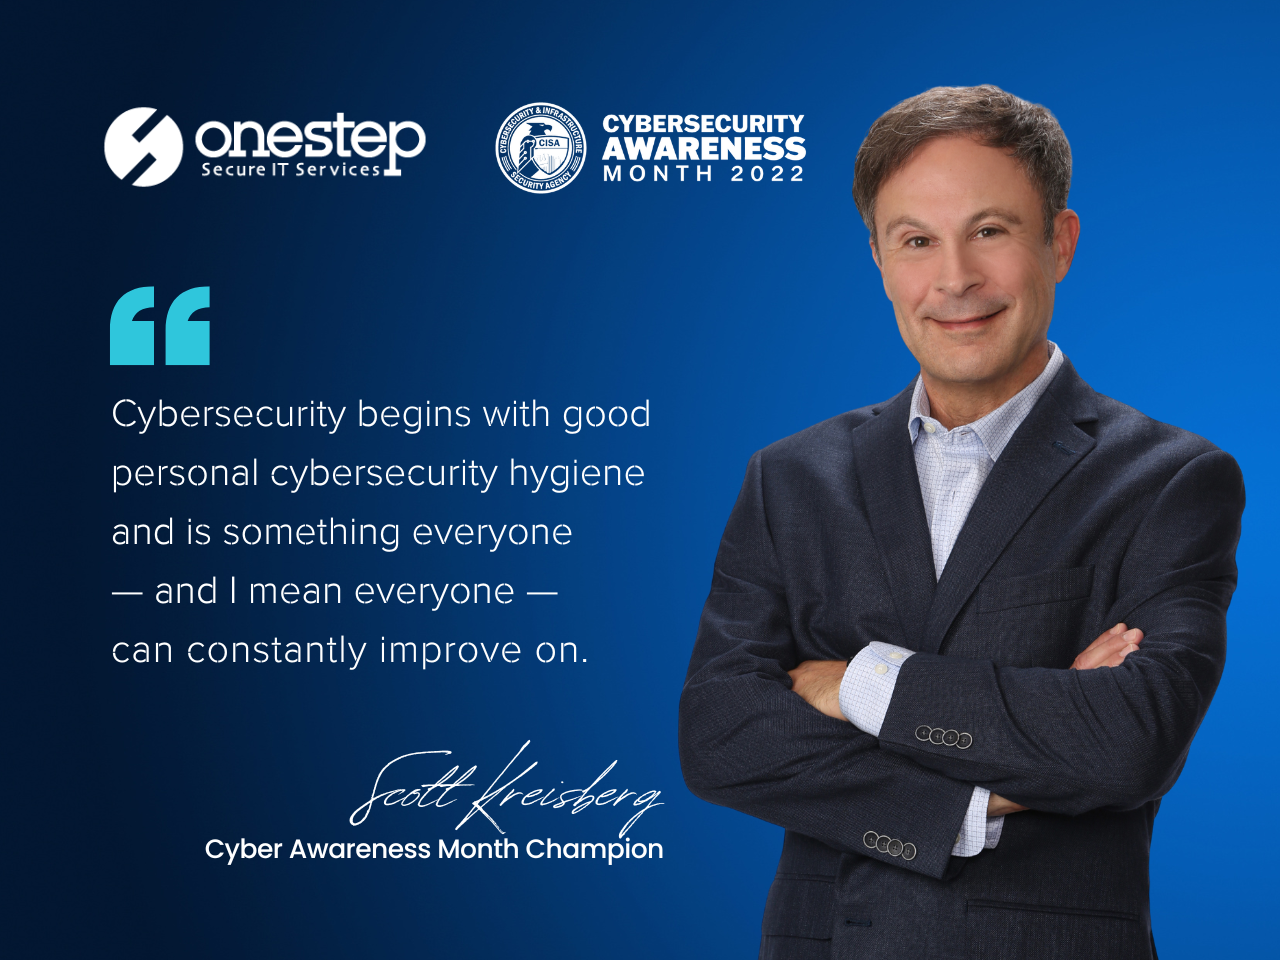 One Step Secure IT Founder and CEO Scott Kreisberg, Cybersecurity Awareness Month Champion